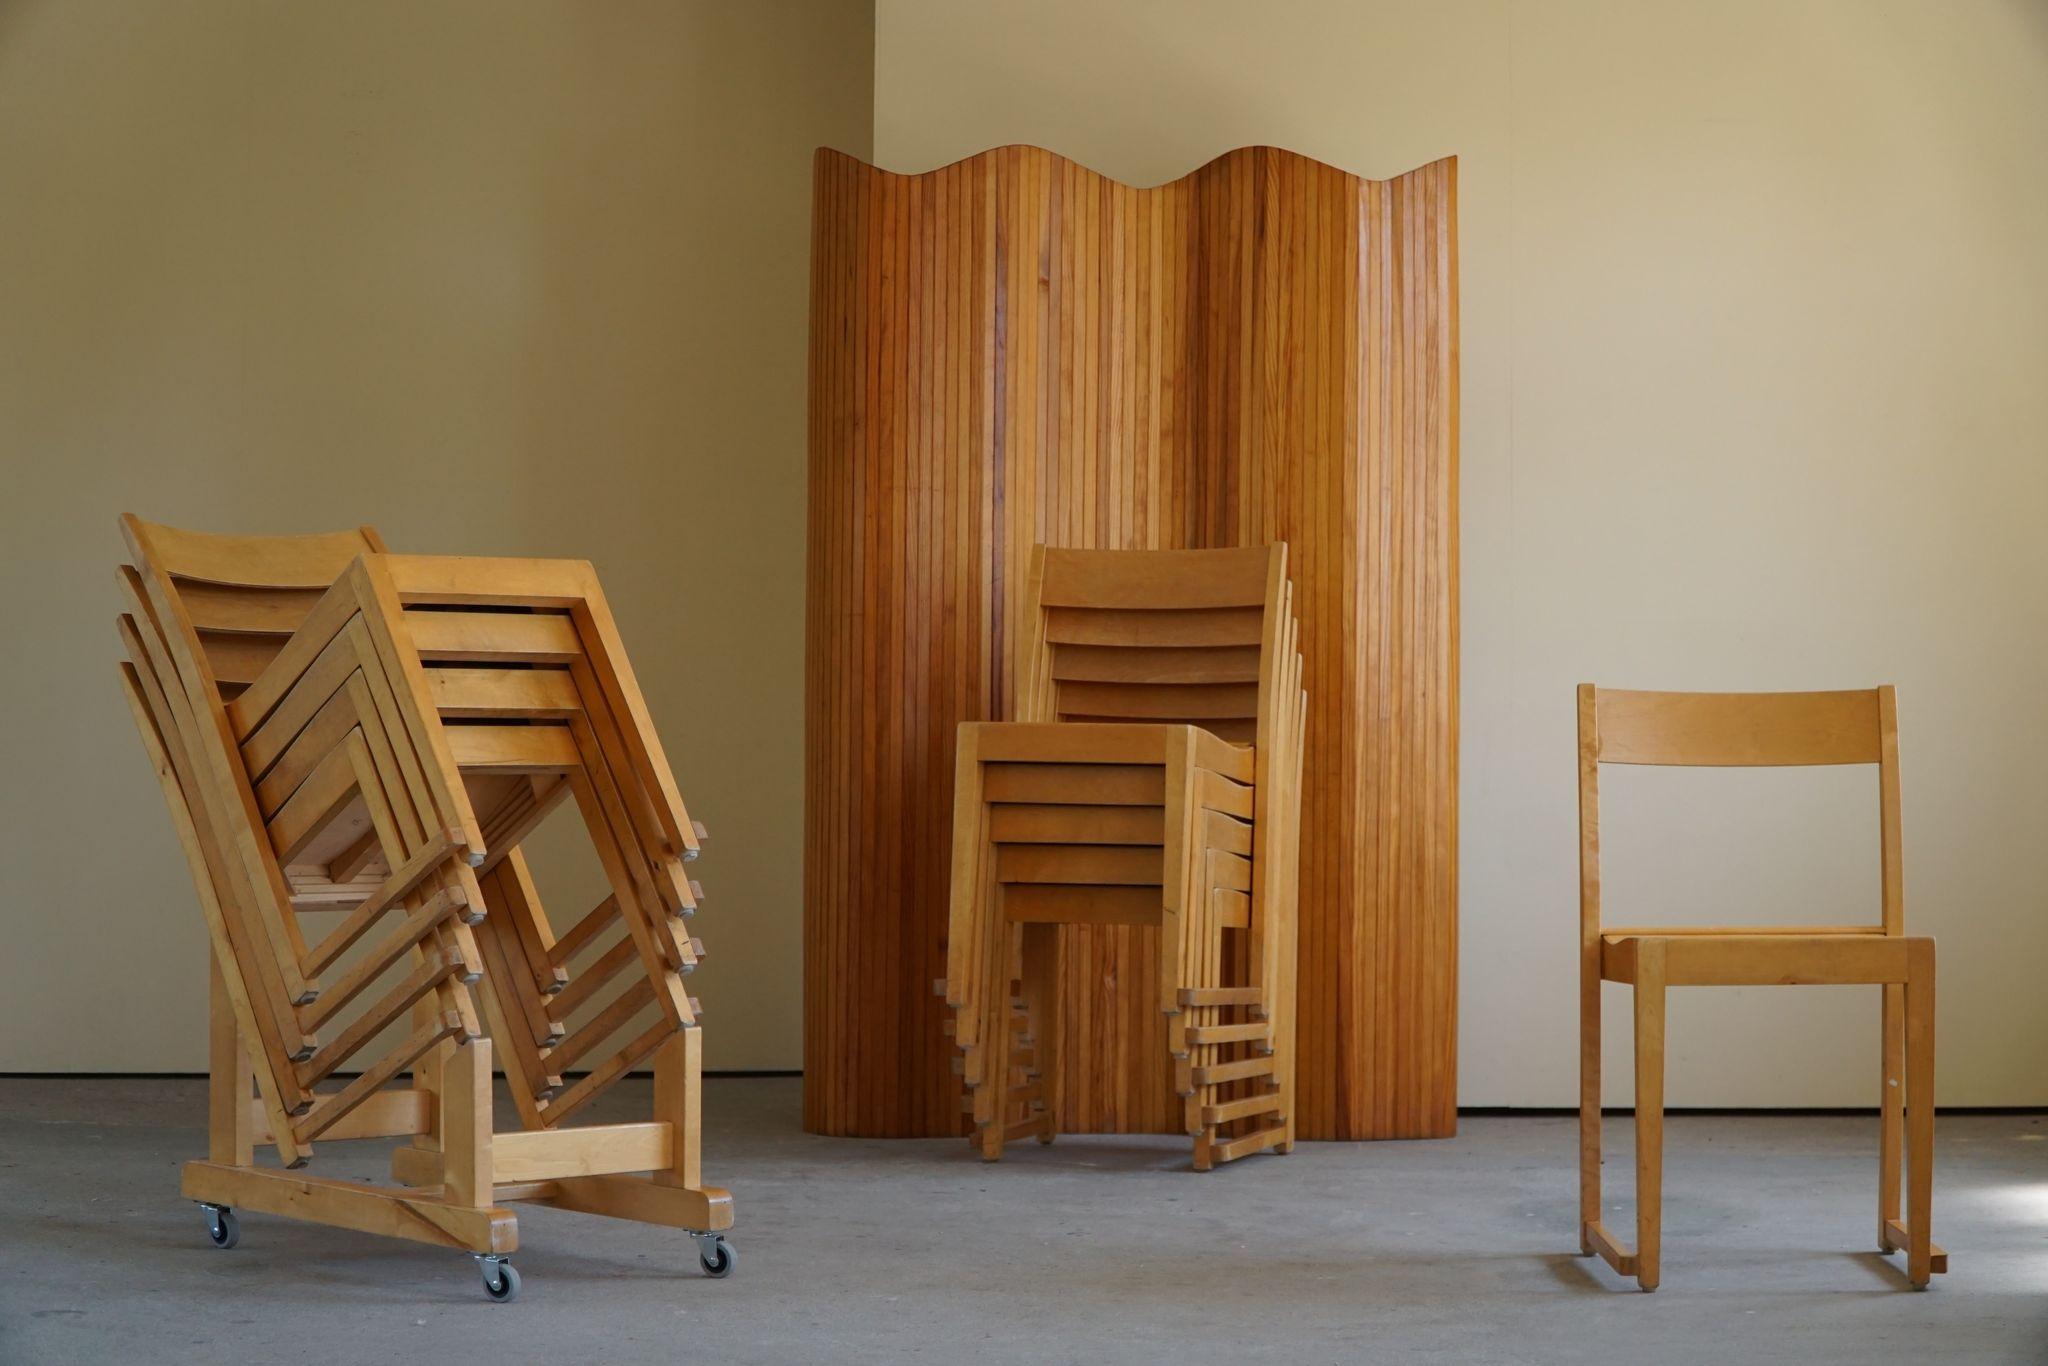 Set of ten dining chairs in birch designed by the Swedish architect Sven Markelius. All chairs are stackable and comes with the original rack. 
Produced by Bodafors for the Helsingborg Concert Hall in 1932, here by the nickname 